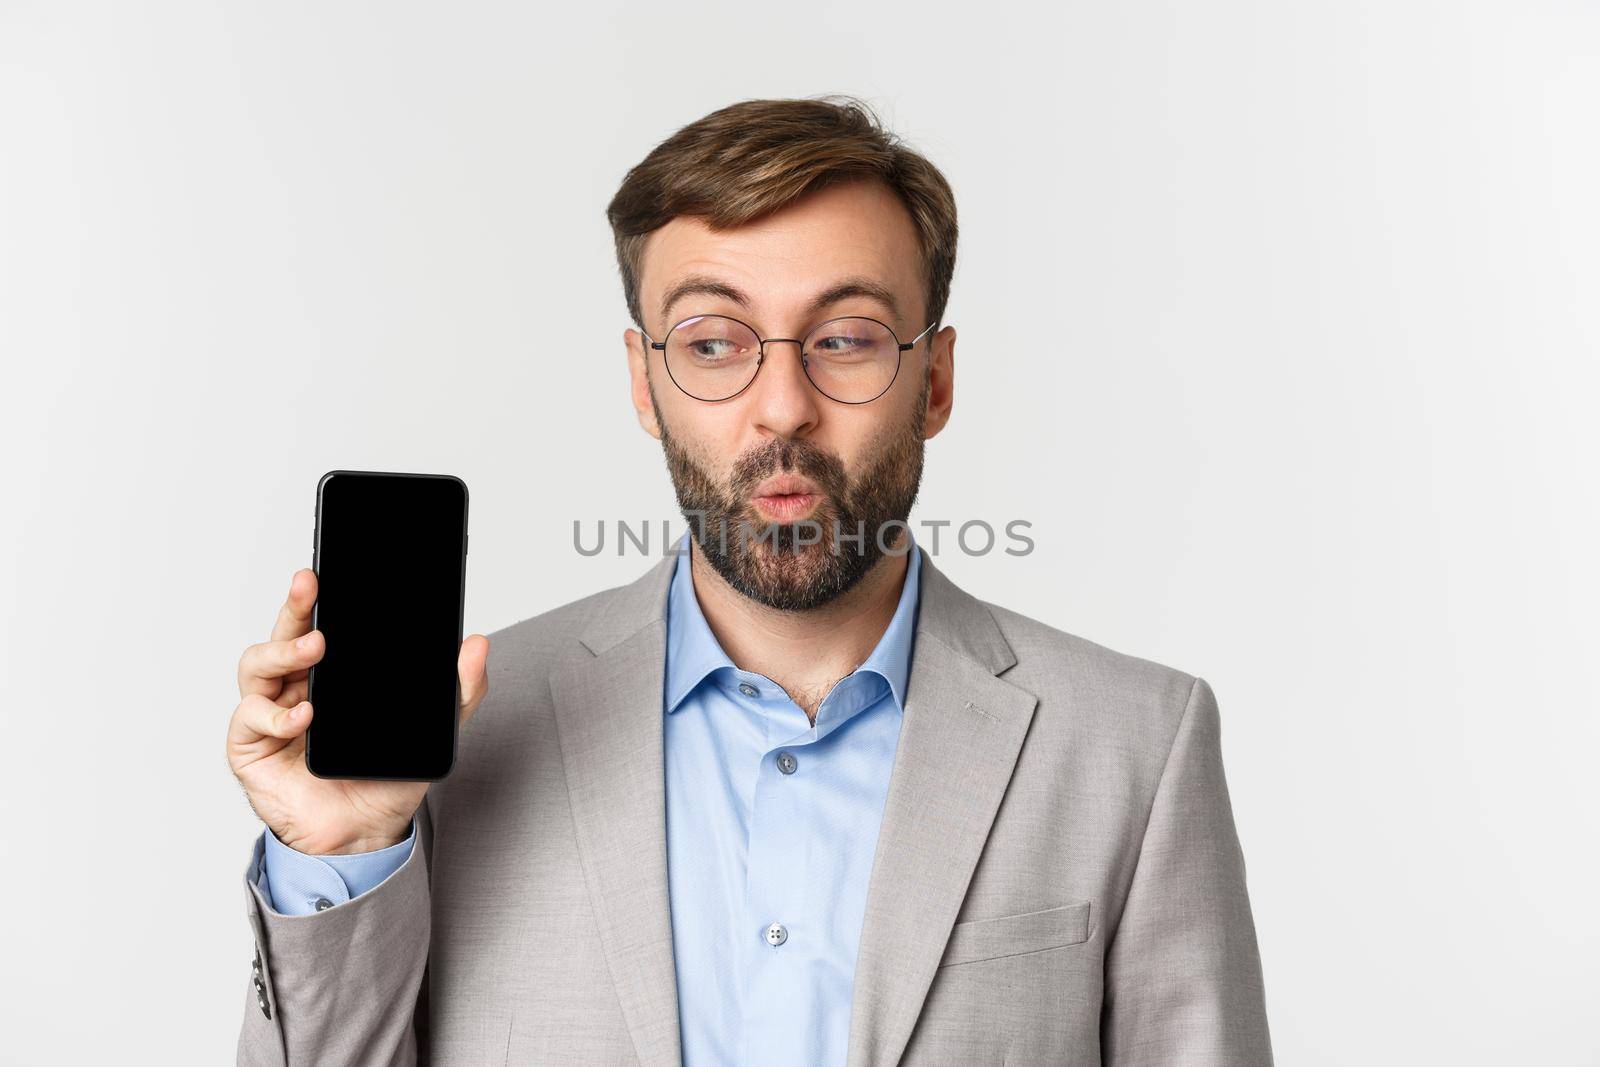 Close-up of excited businessman in gray suit and glasses, showing mobile phone screen and looking happy, standing over white background.